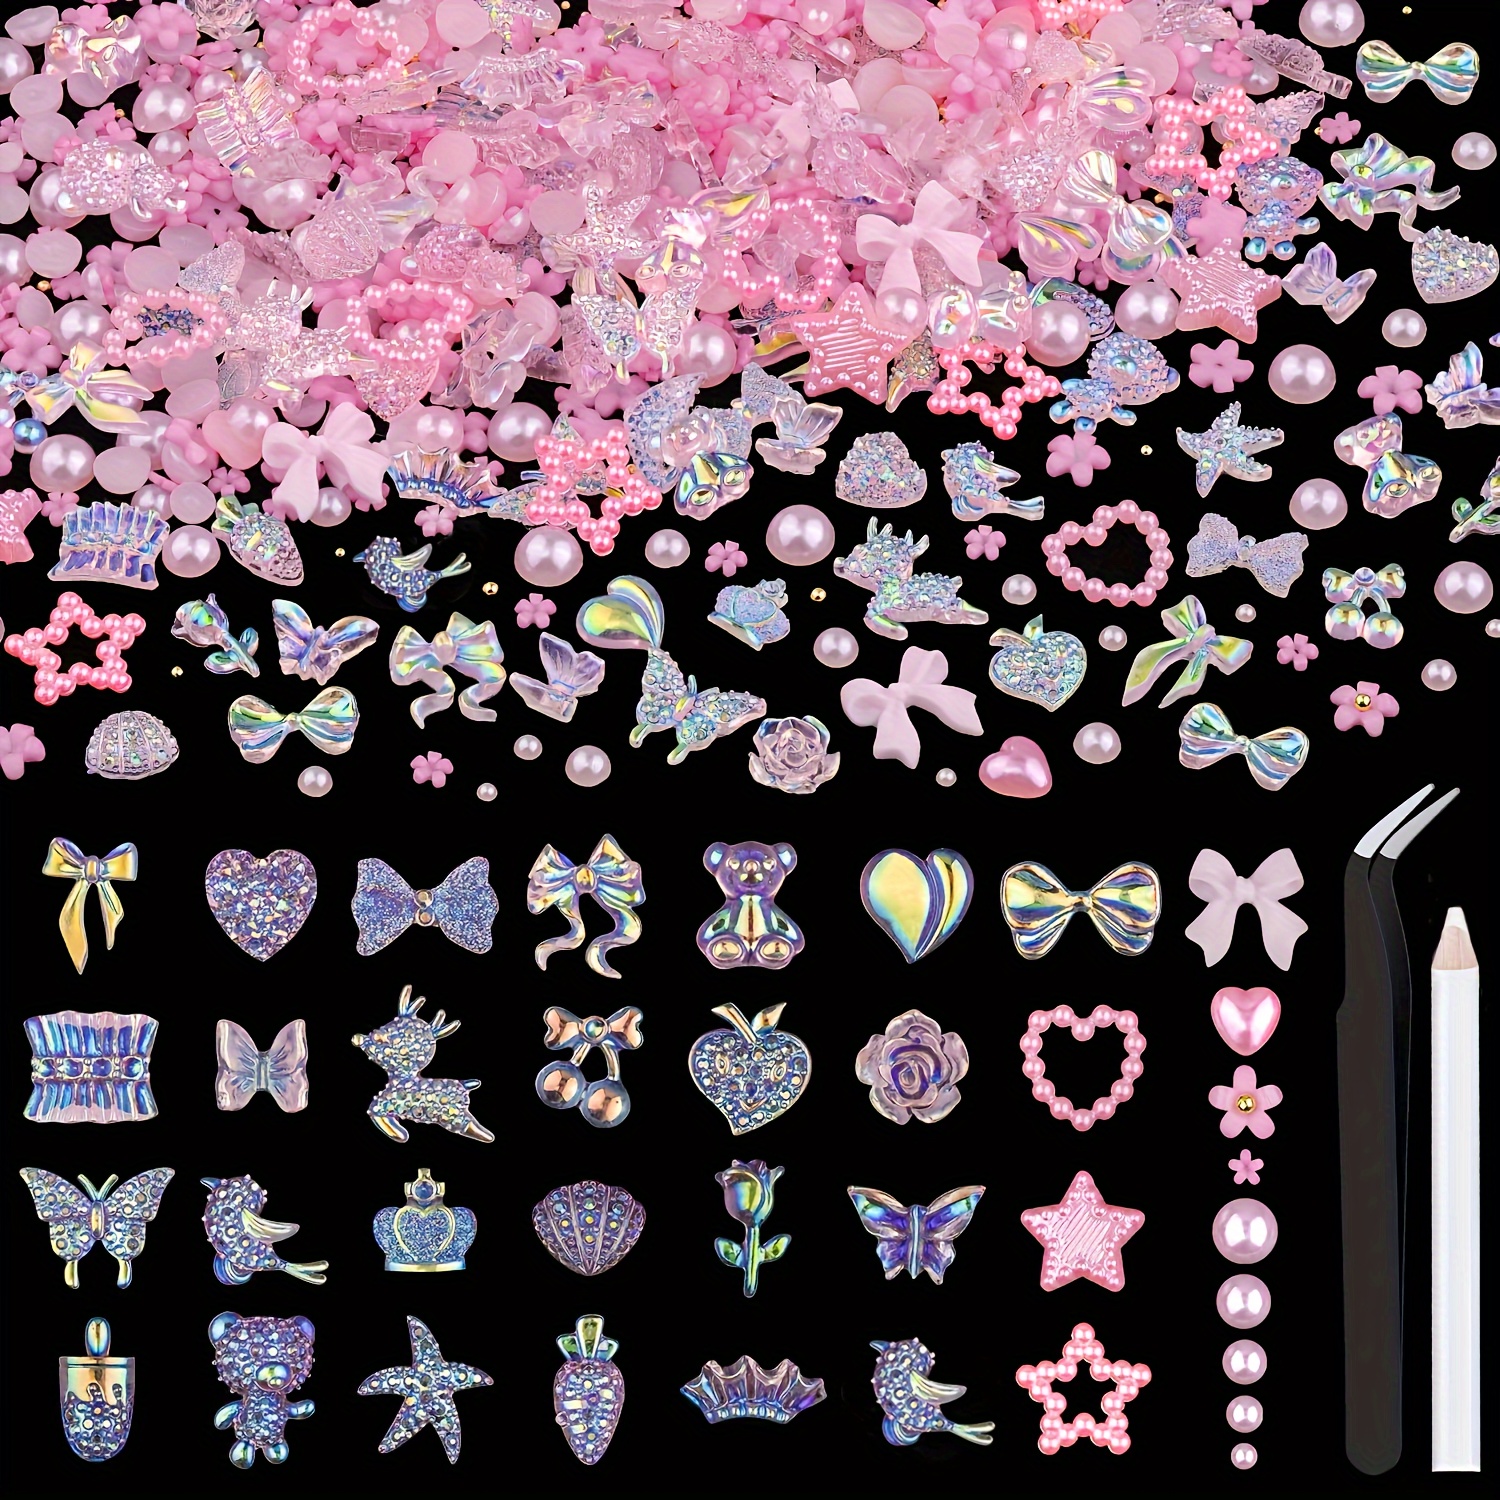 

150 Pcs 3d Nail Charms Butterfly Bow Star Heart Bear Shiny Jewels With 3d Flowers And Flat Pearls, Over 400 Pcs Cute Charms In Total With Pickup Tools For Nail Art Decoration(pink)